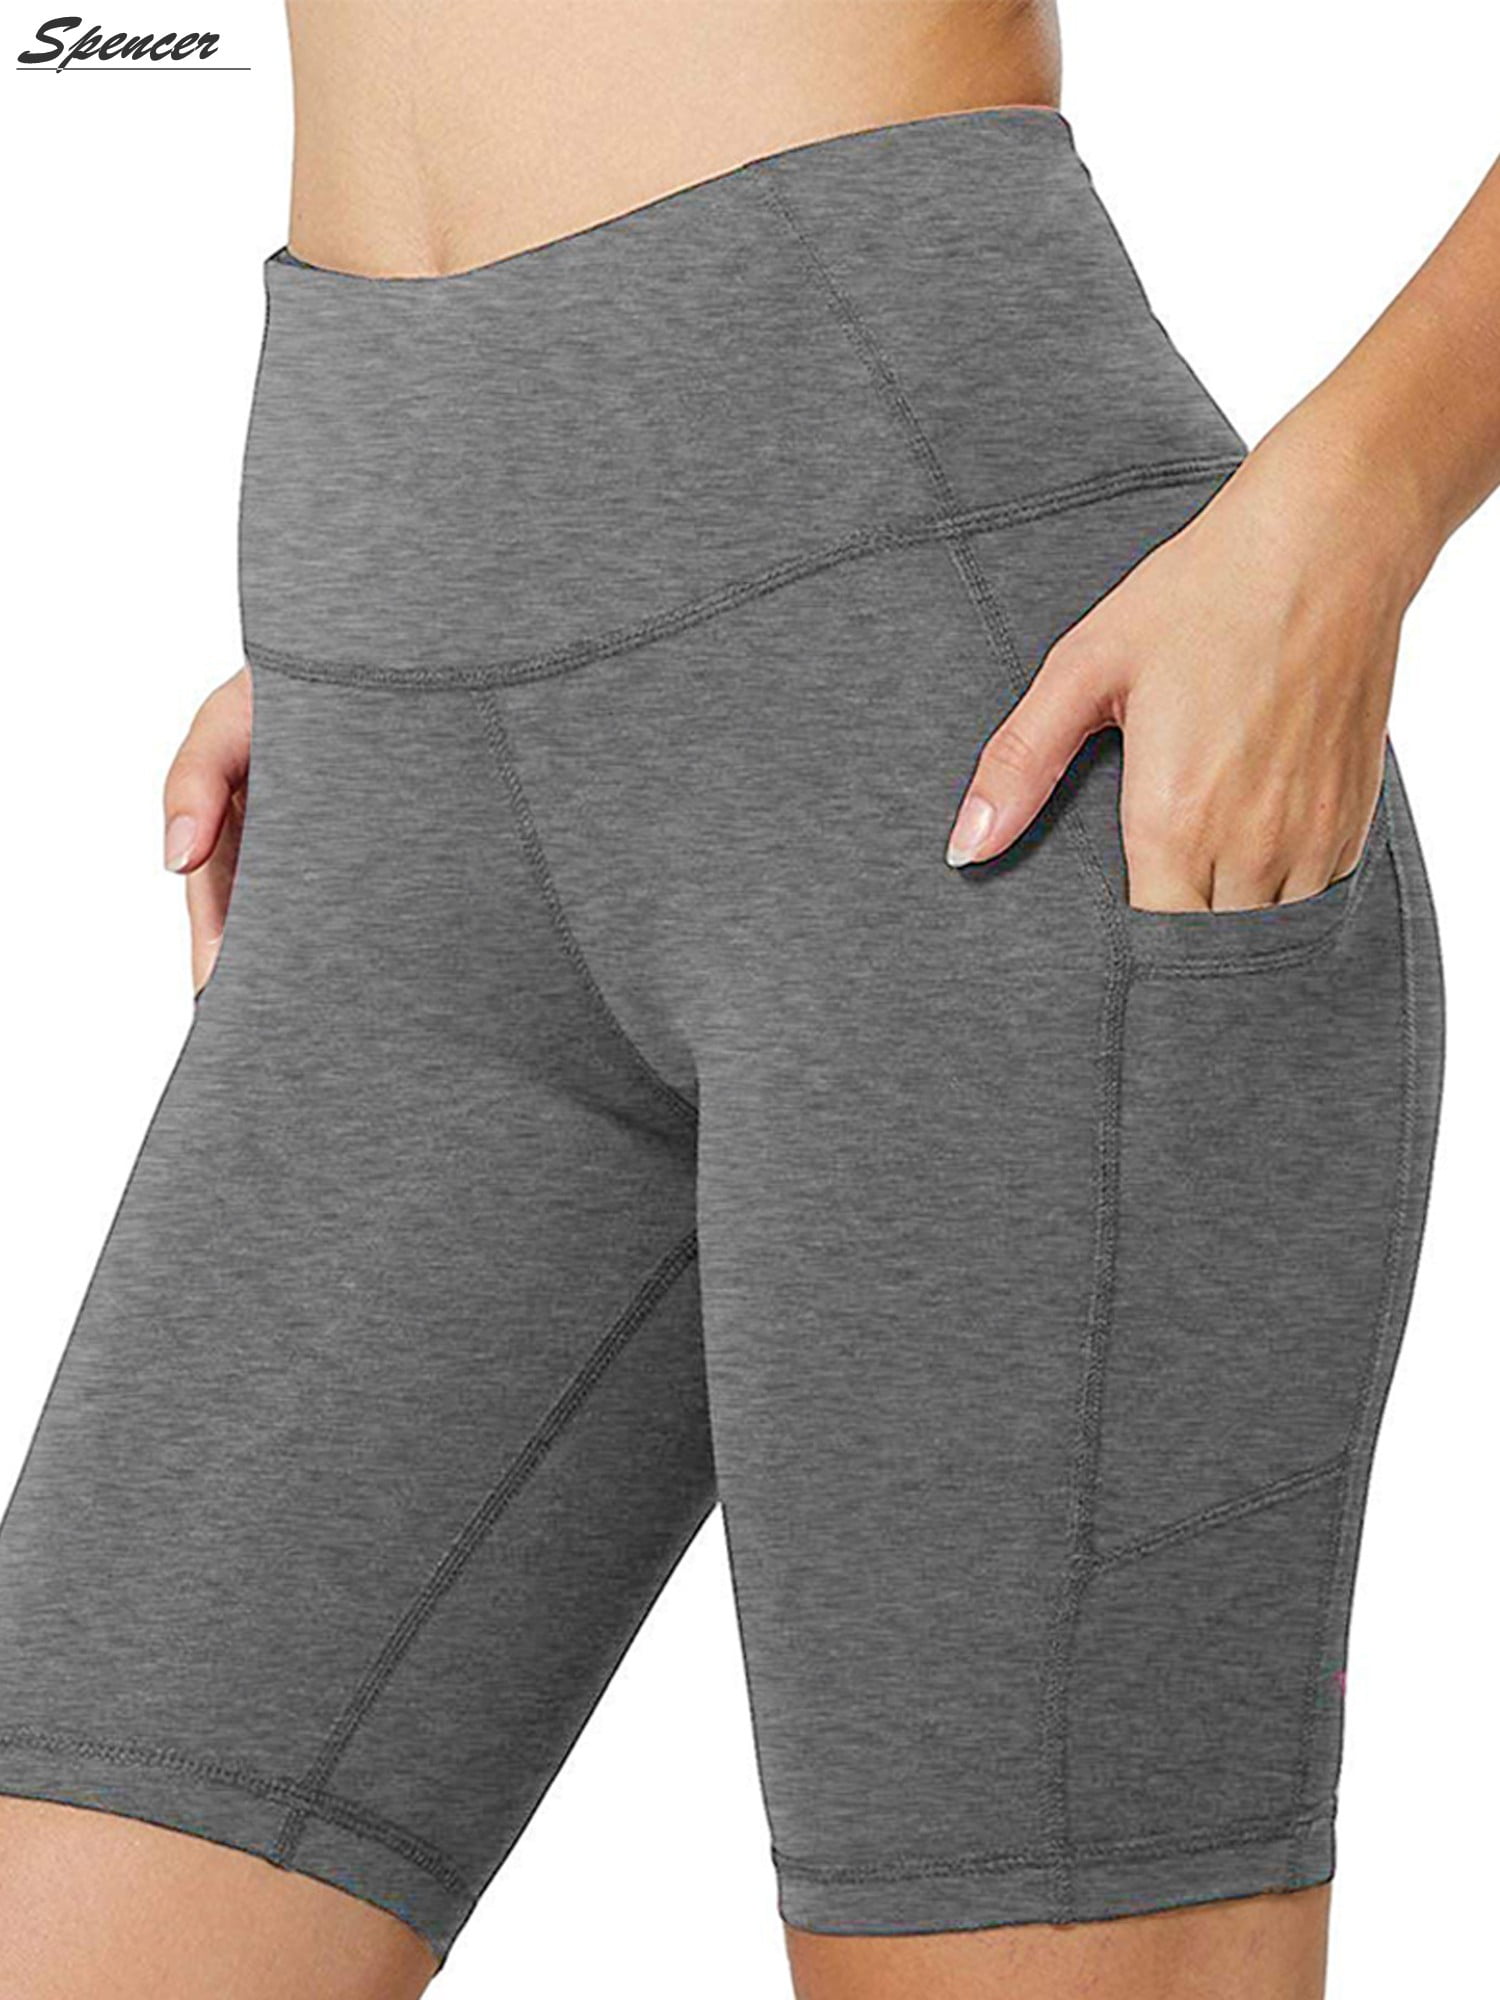 Voqeen Women High Waist Yoga Pants with Pockets Hip Lift Stretch Running Workout Yoga Leggings Tummy Control Sports Shorts Exercise Tights